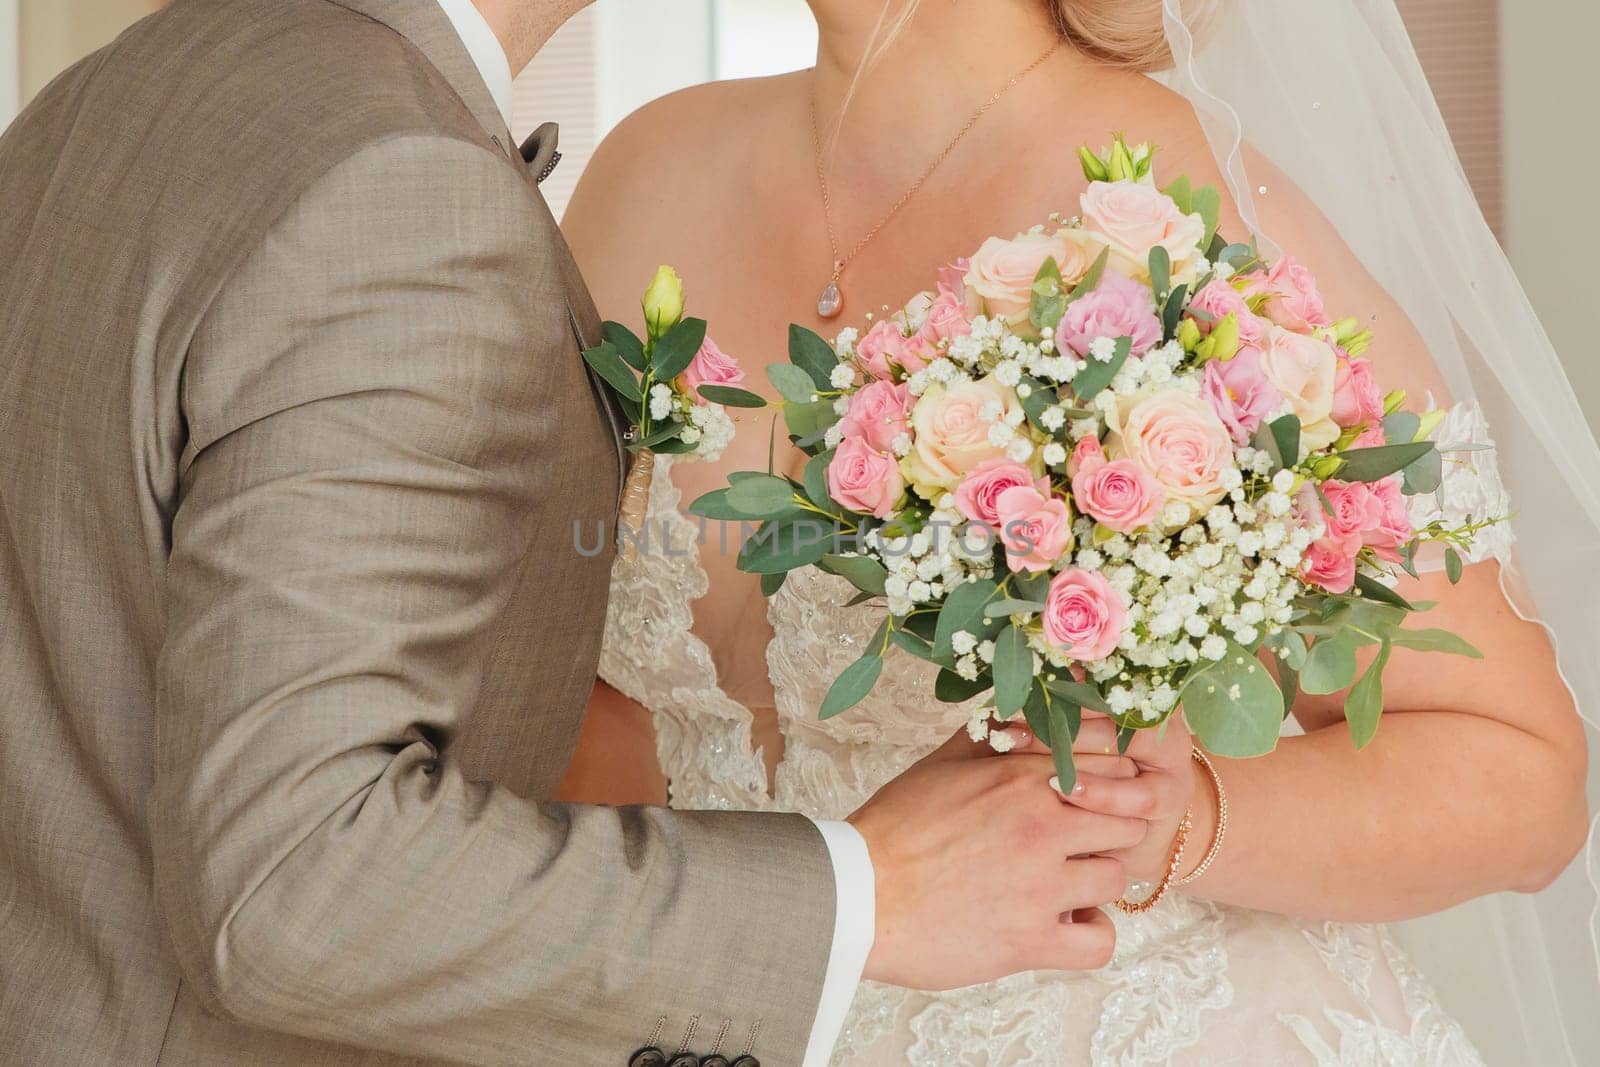 The couple embracing each other holding a bouquet. Close-up.